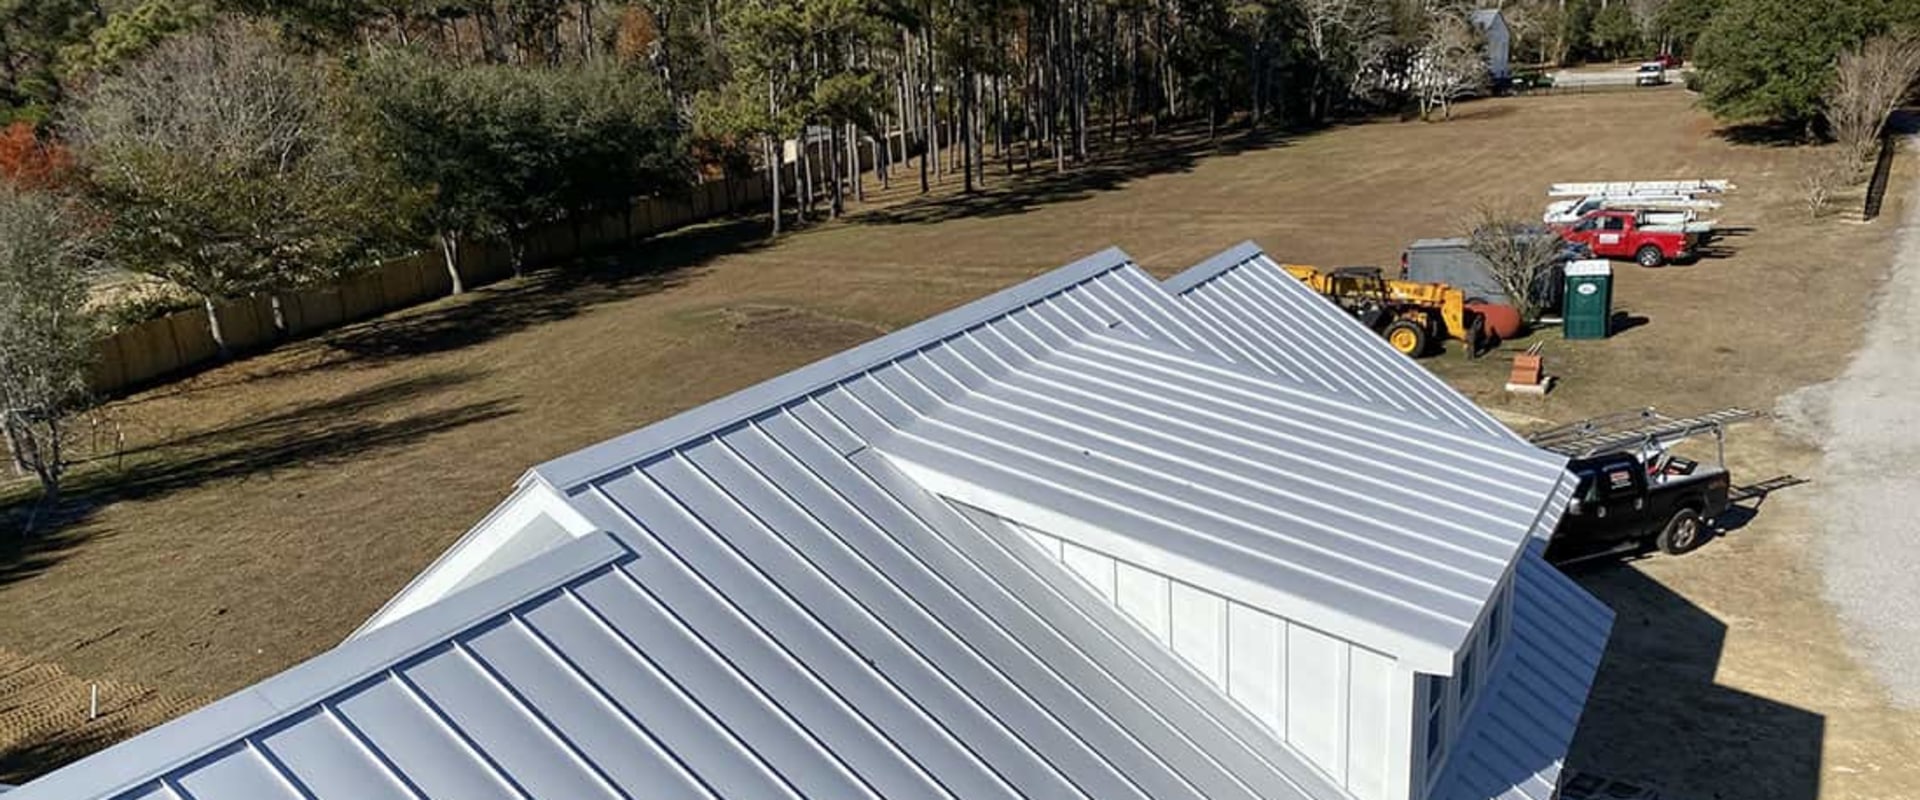 Roof Installation Services in Wilmington NC: What You Need to Know